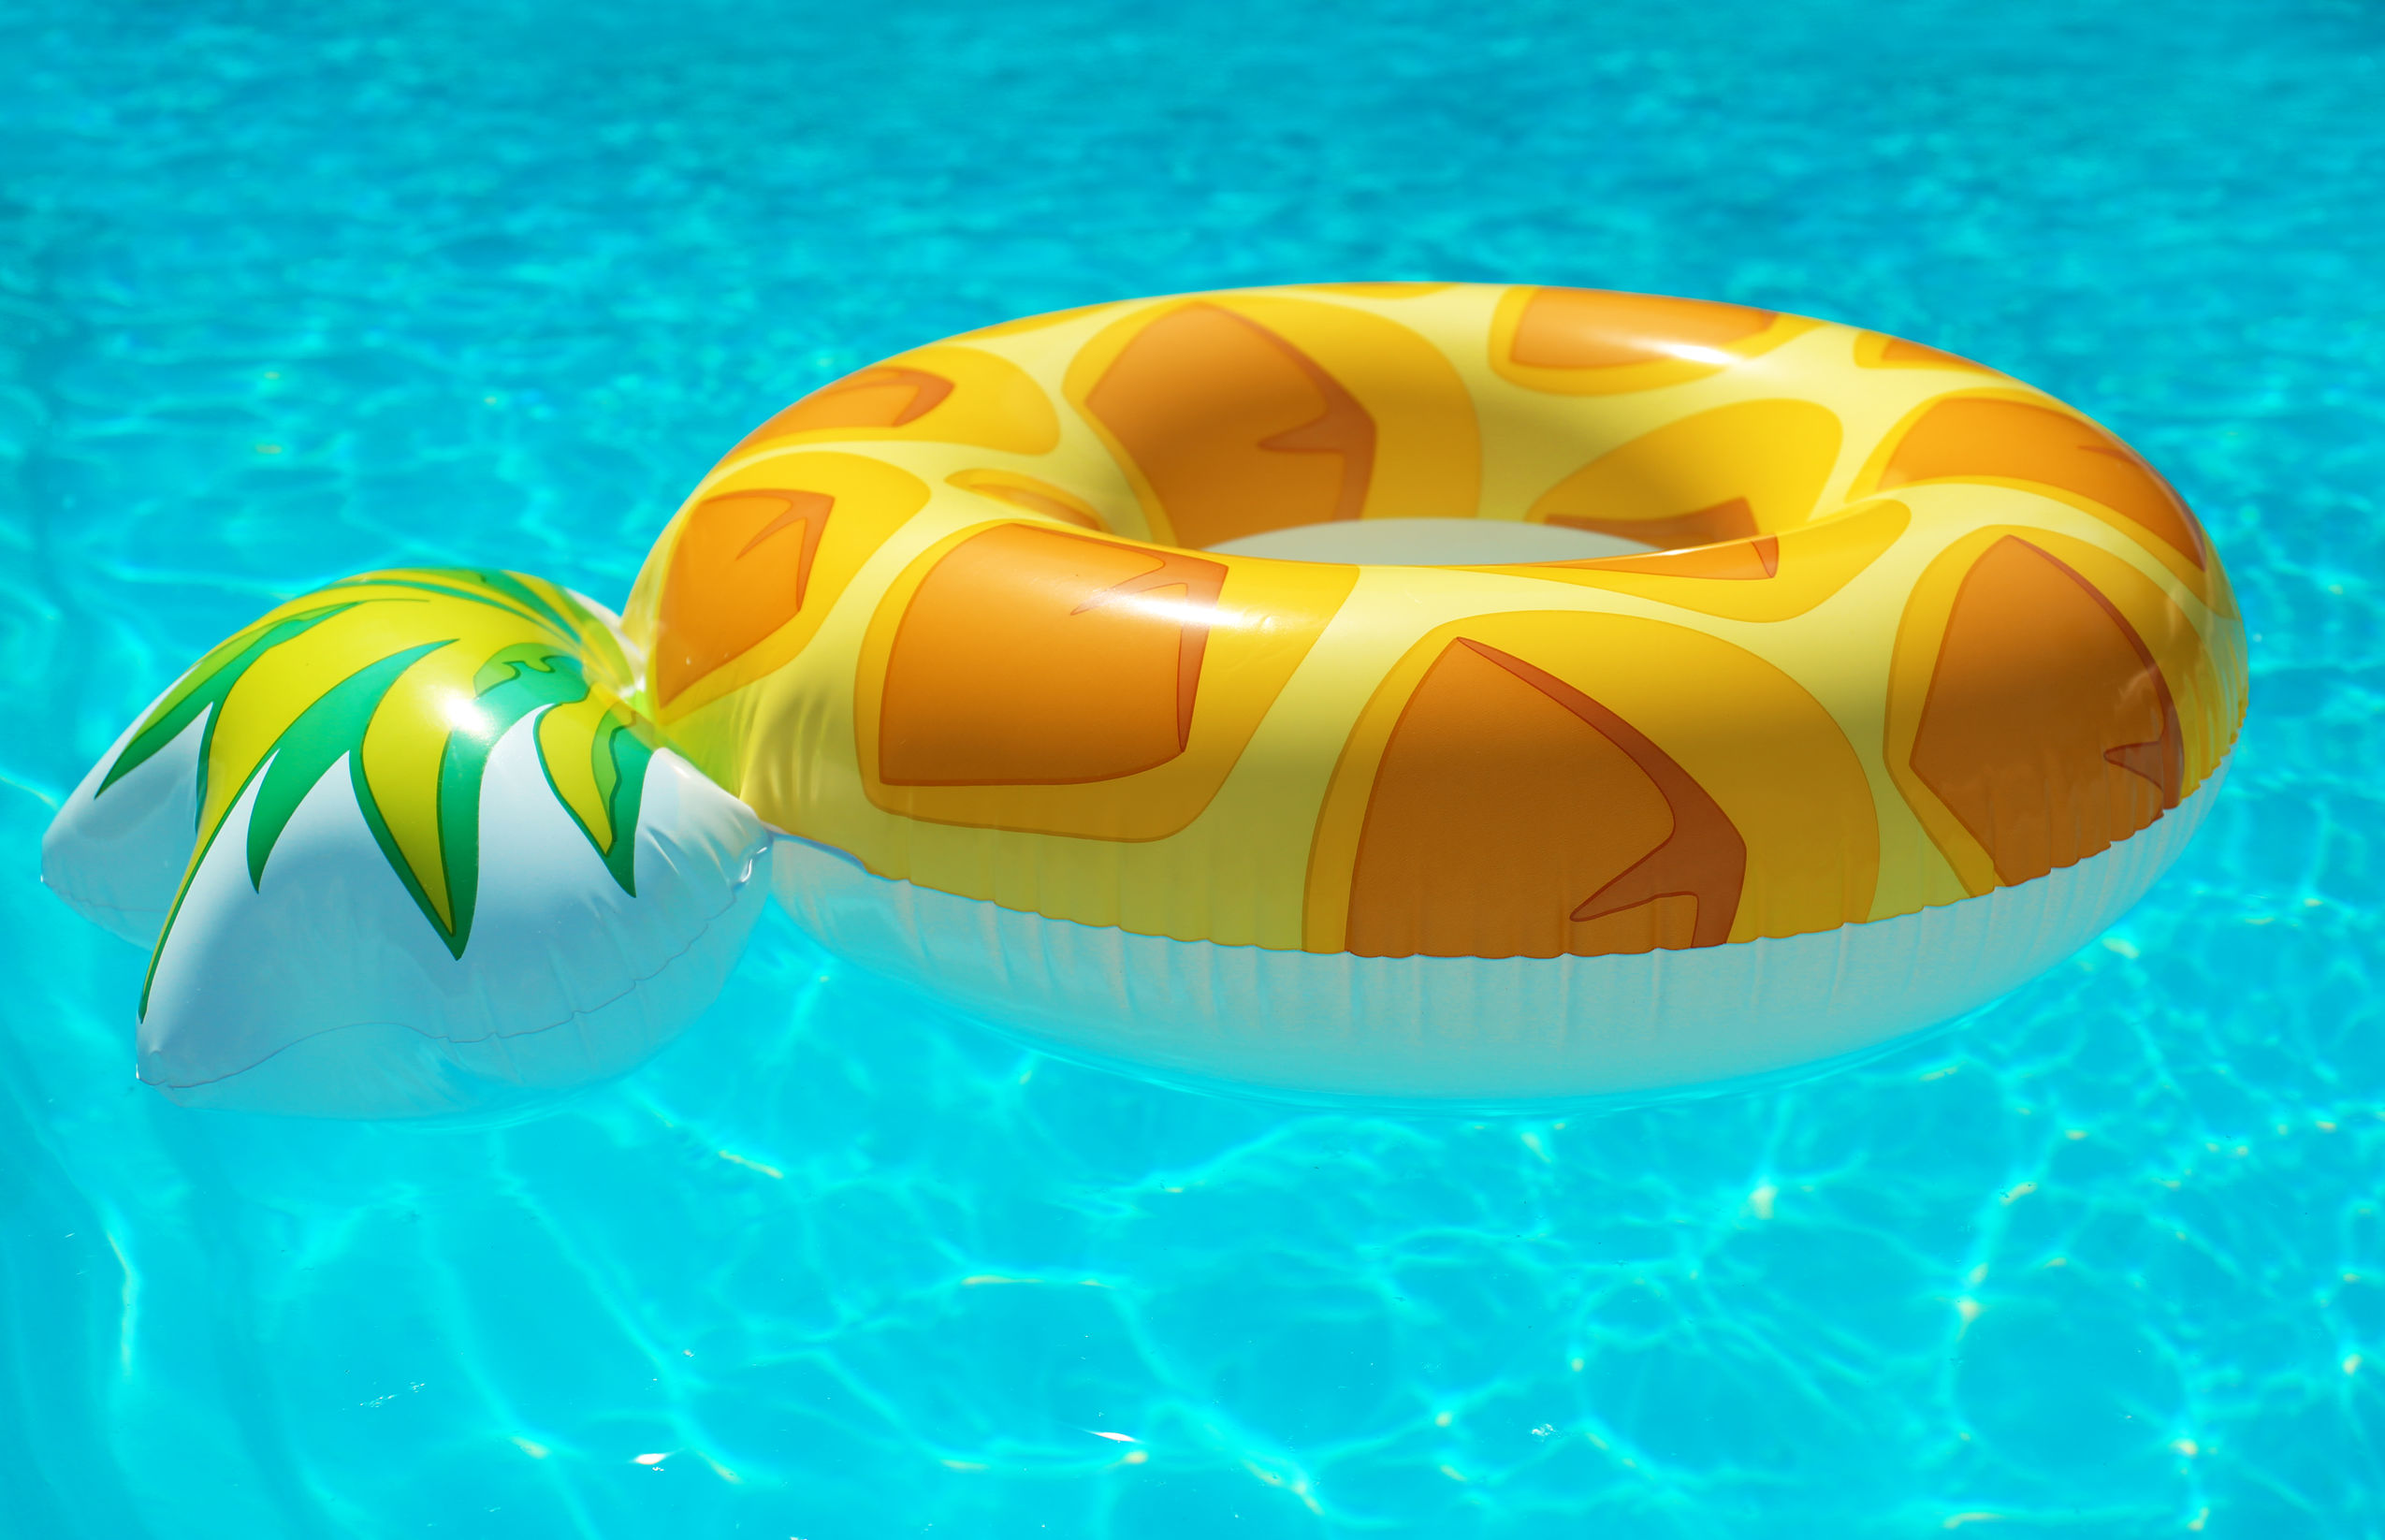 floating pool decorations